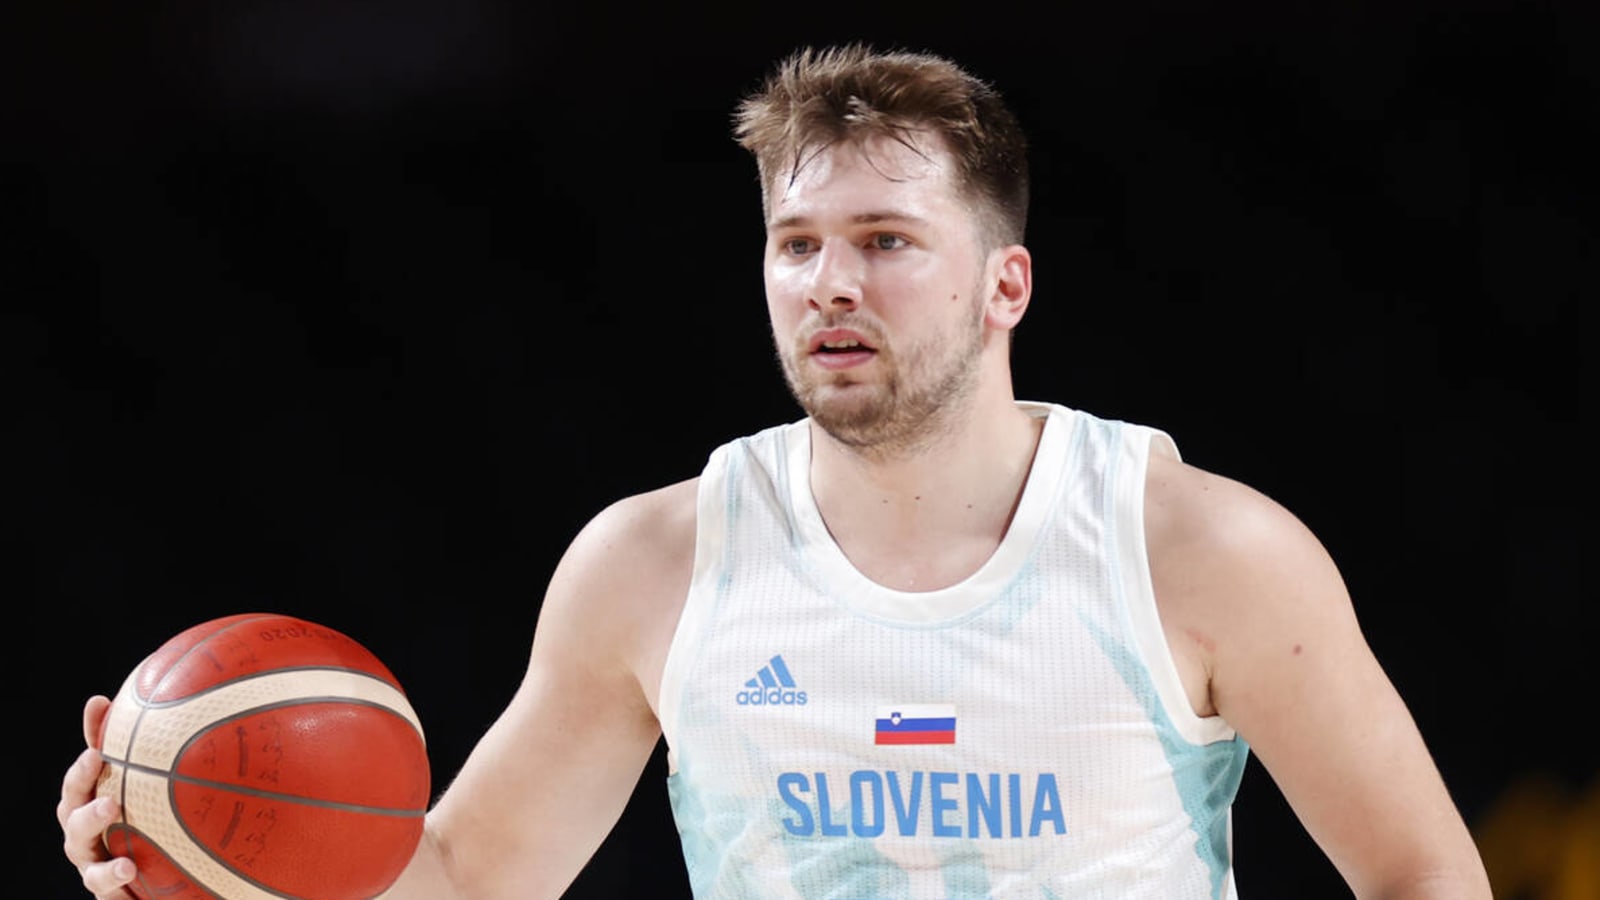 Luka Doncic now electrifying competition after EuroBasket experience